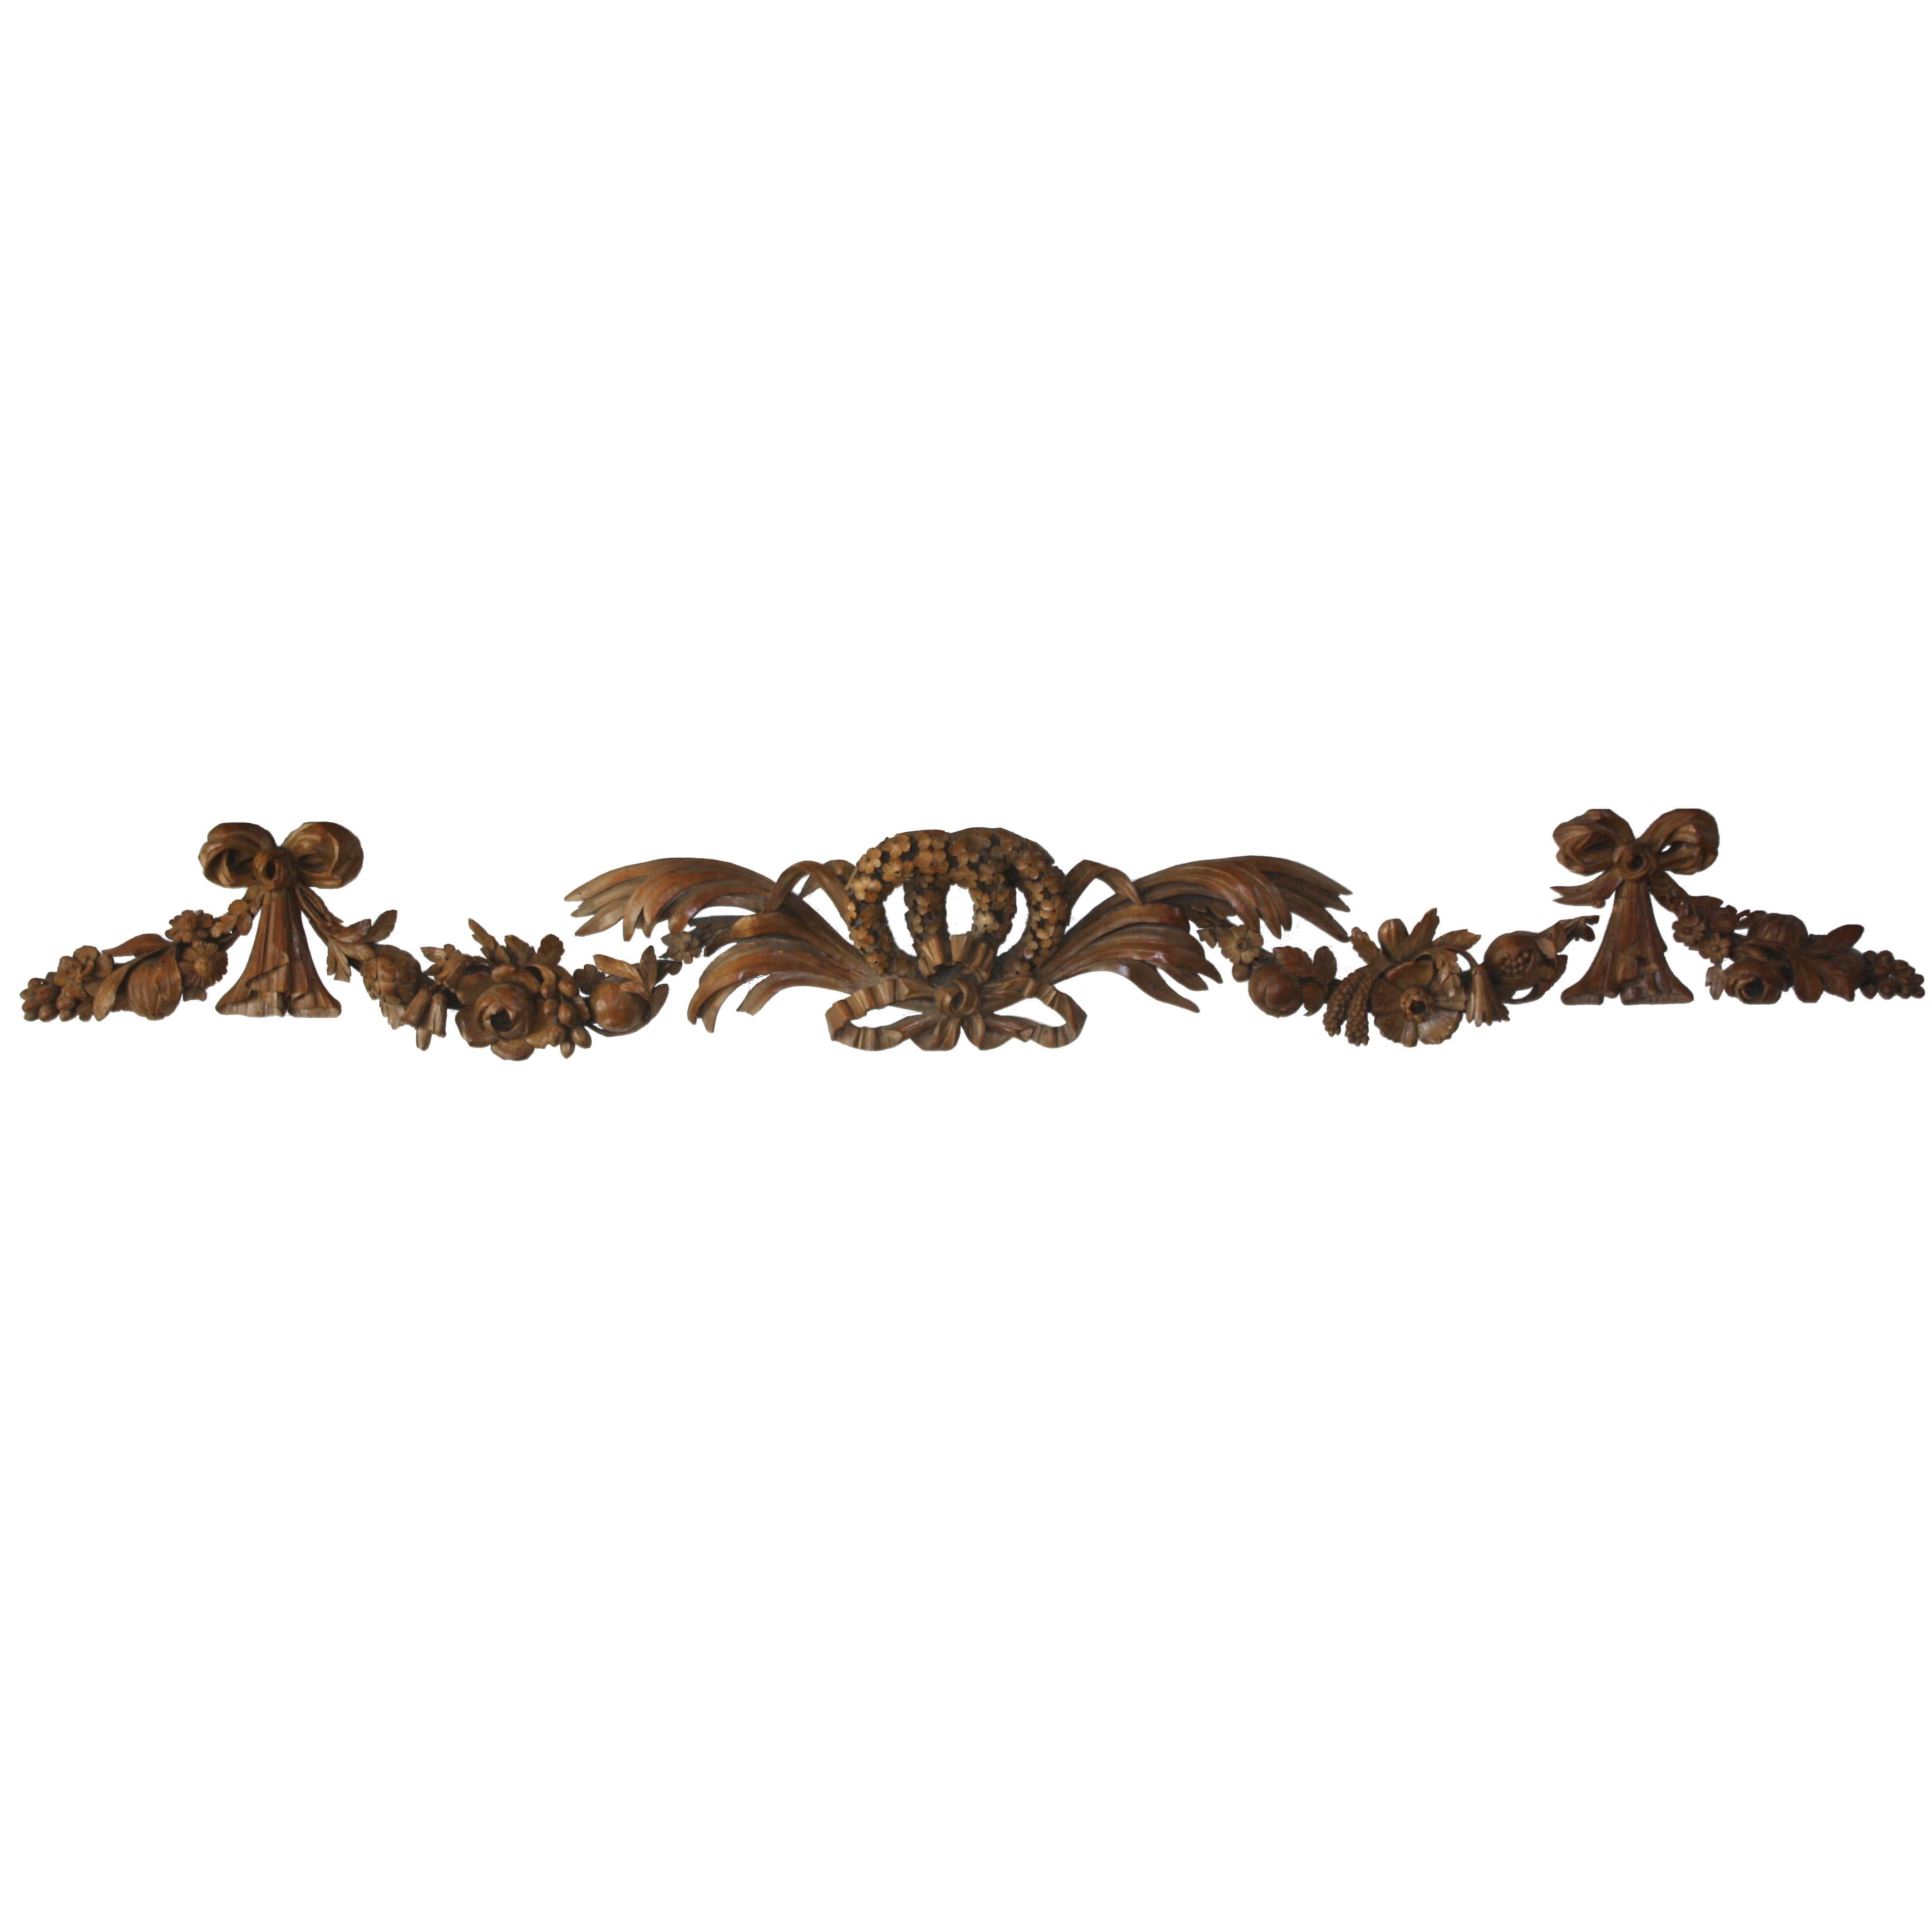 Highly Decorative Well Carved Wall Ornament after Gringling Gibbons